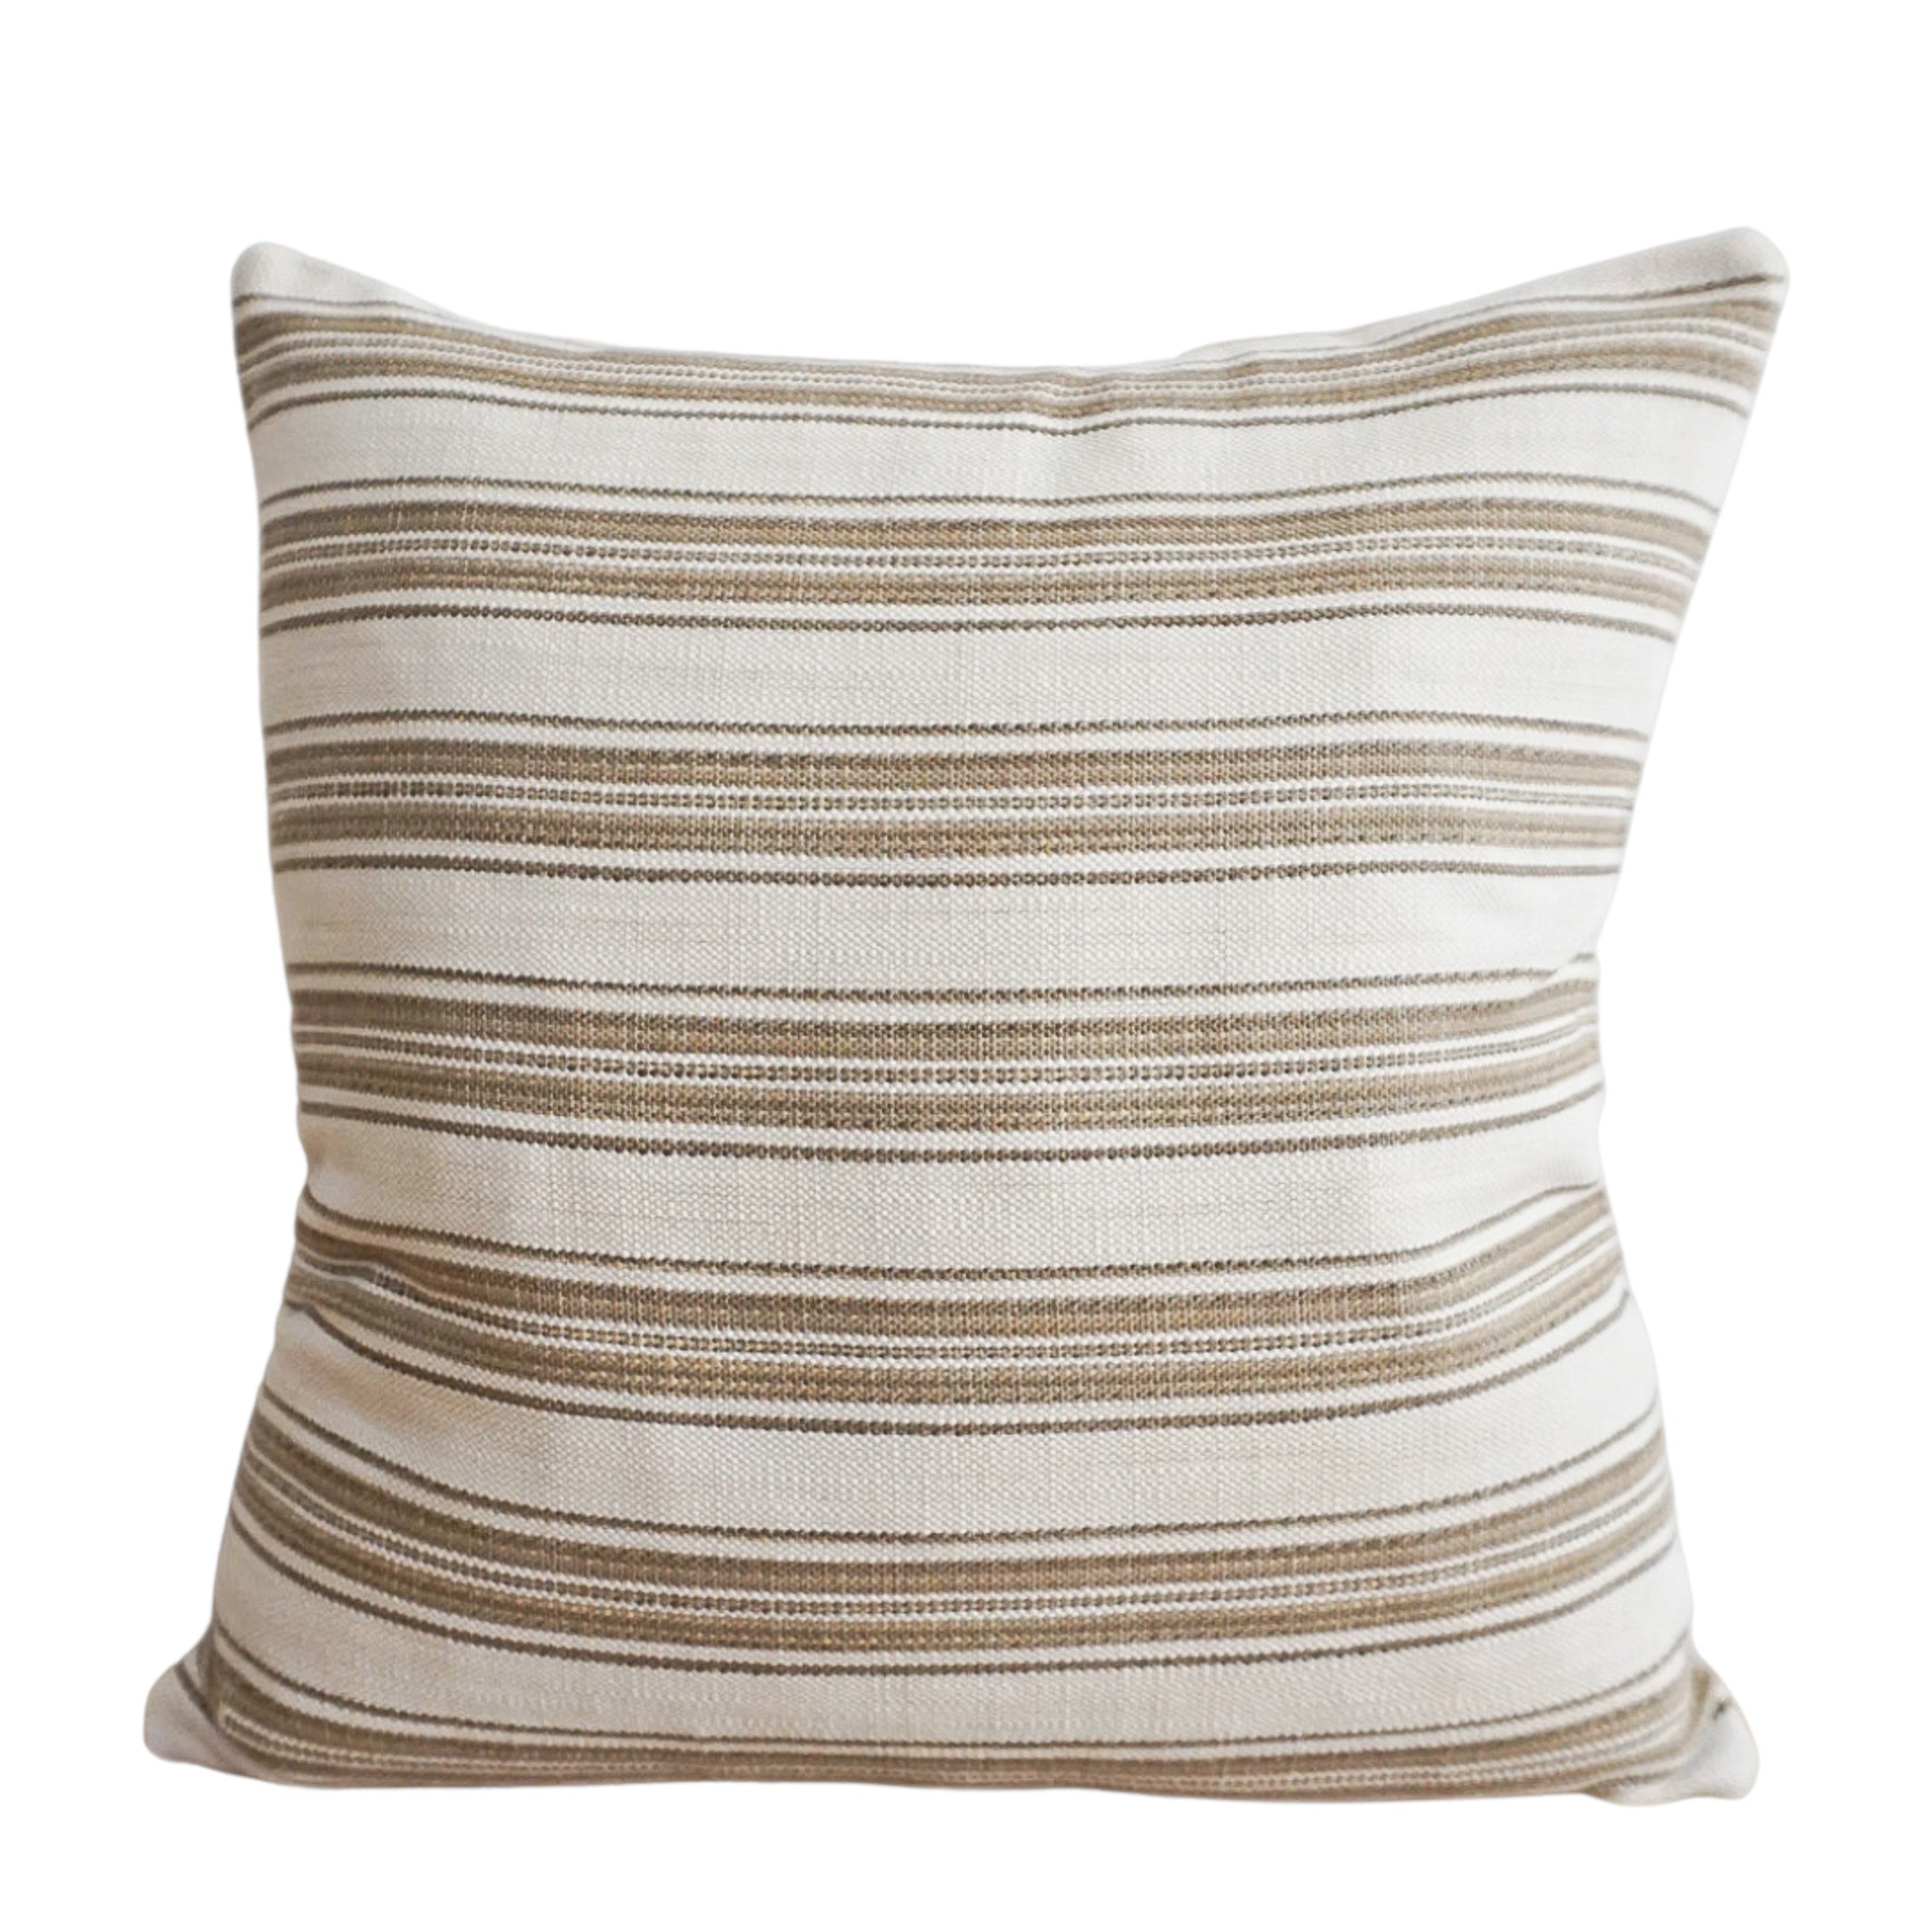 Bobbie Brown Outdoor Pillow Cover